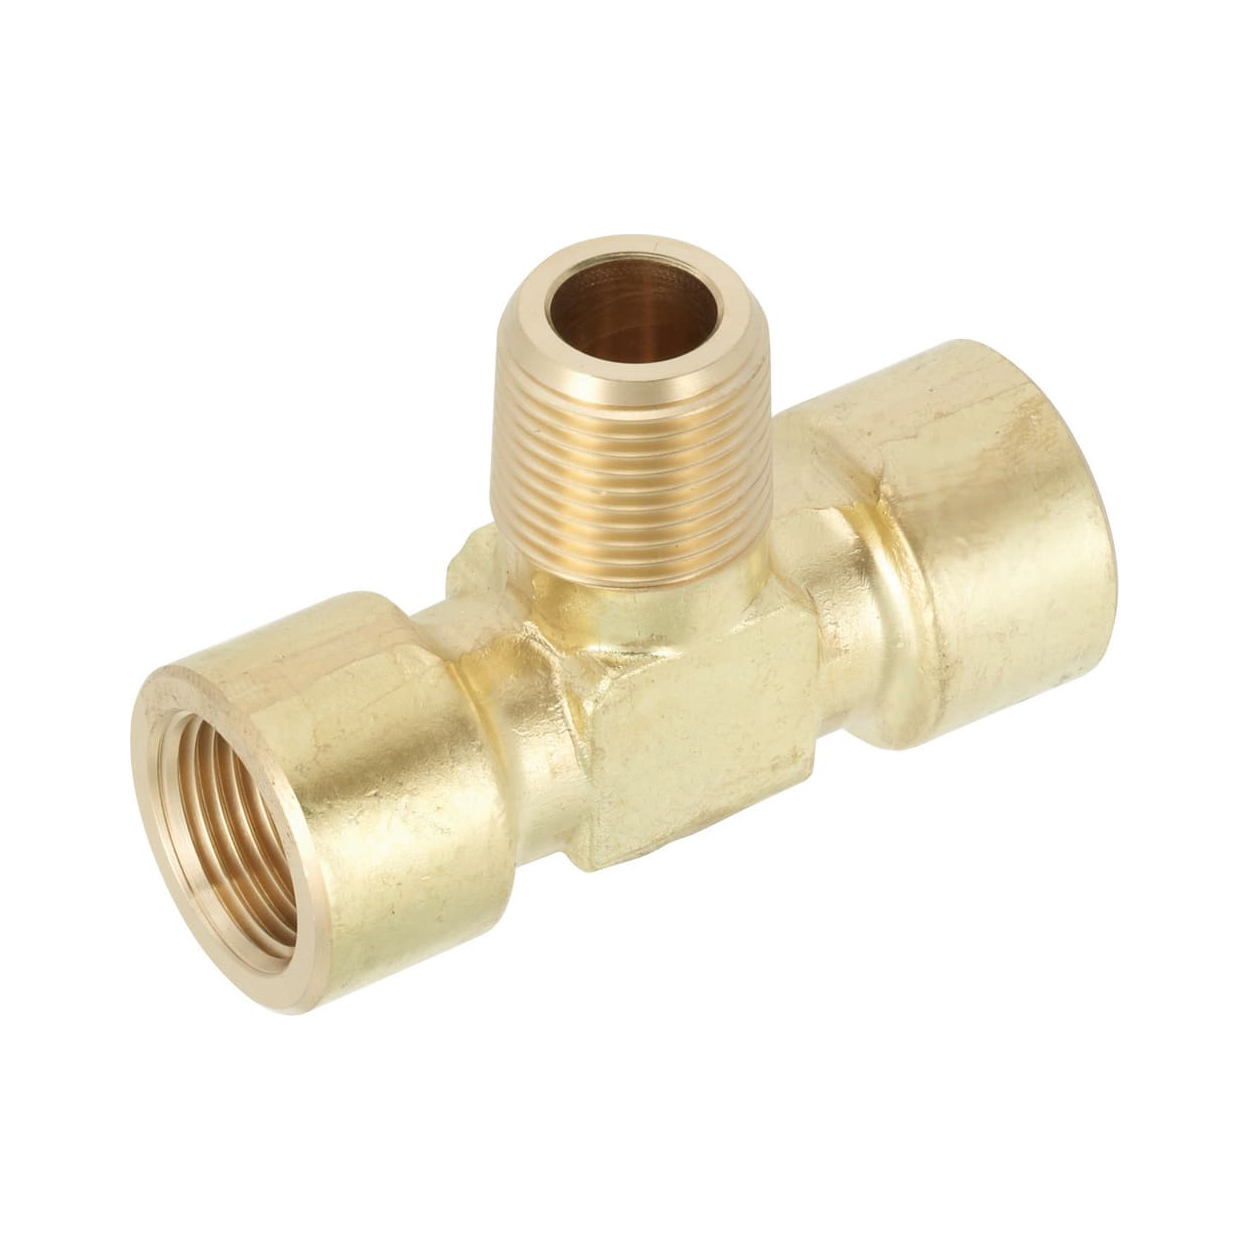 Brass Fittings for Steel Pipe/Tee/Threaded/Tapped (SJSXT6A) 